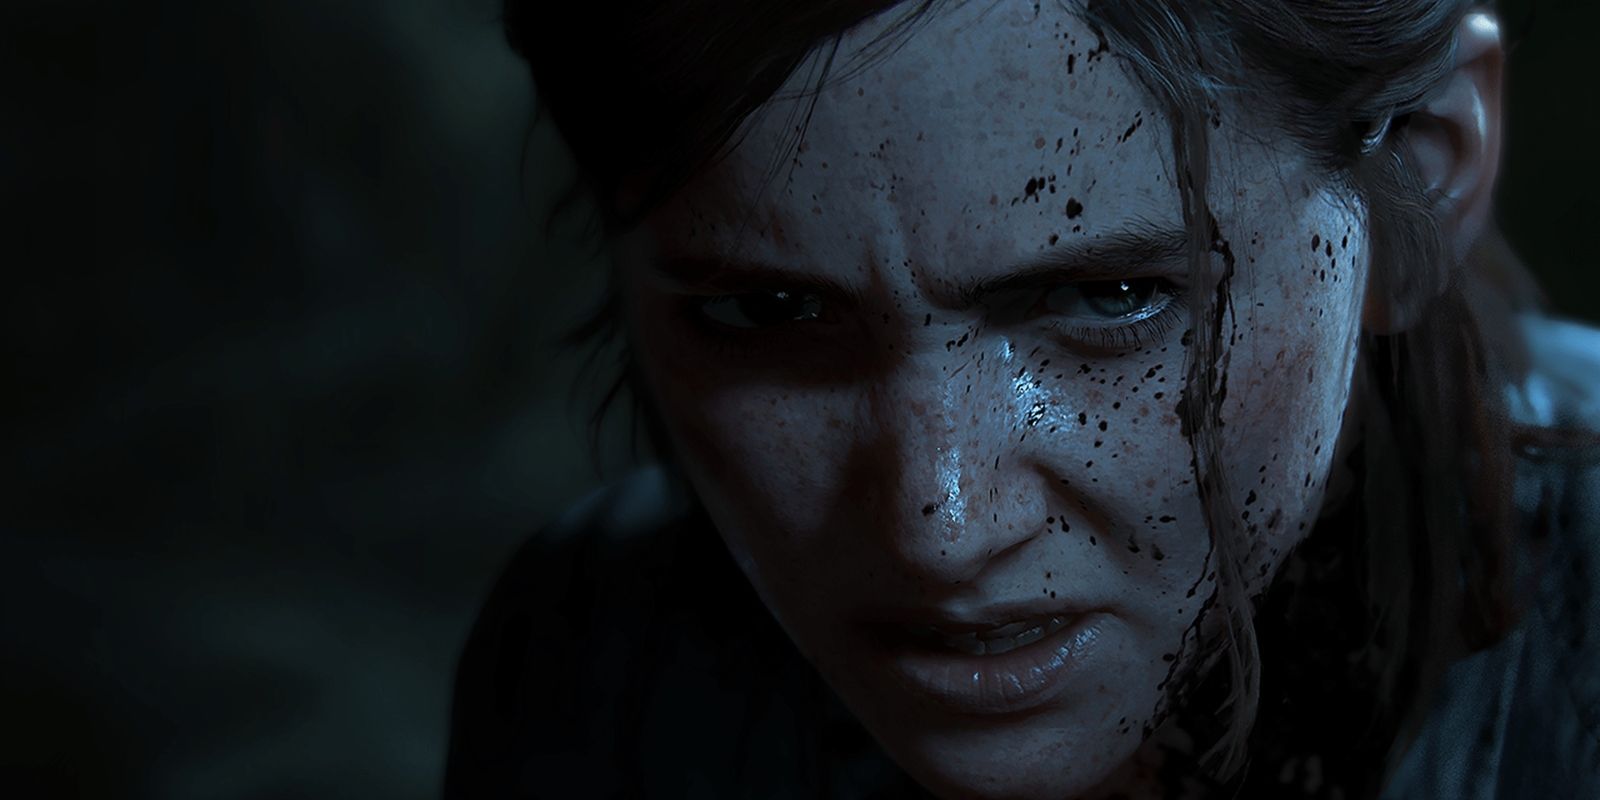 The Last Of Us Part II Should've Gone Even Darker With Its Ending